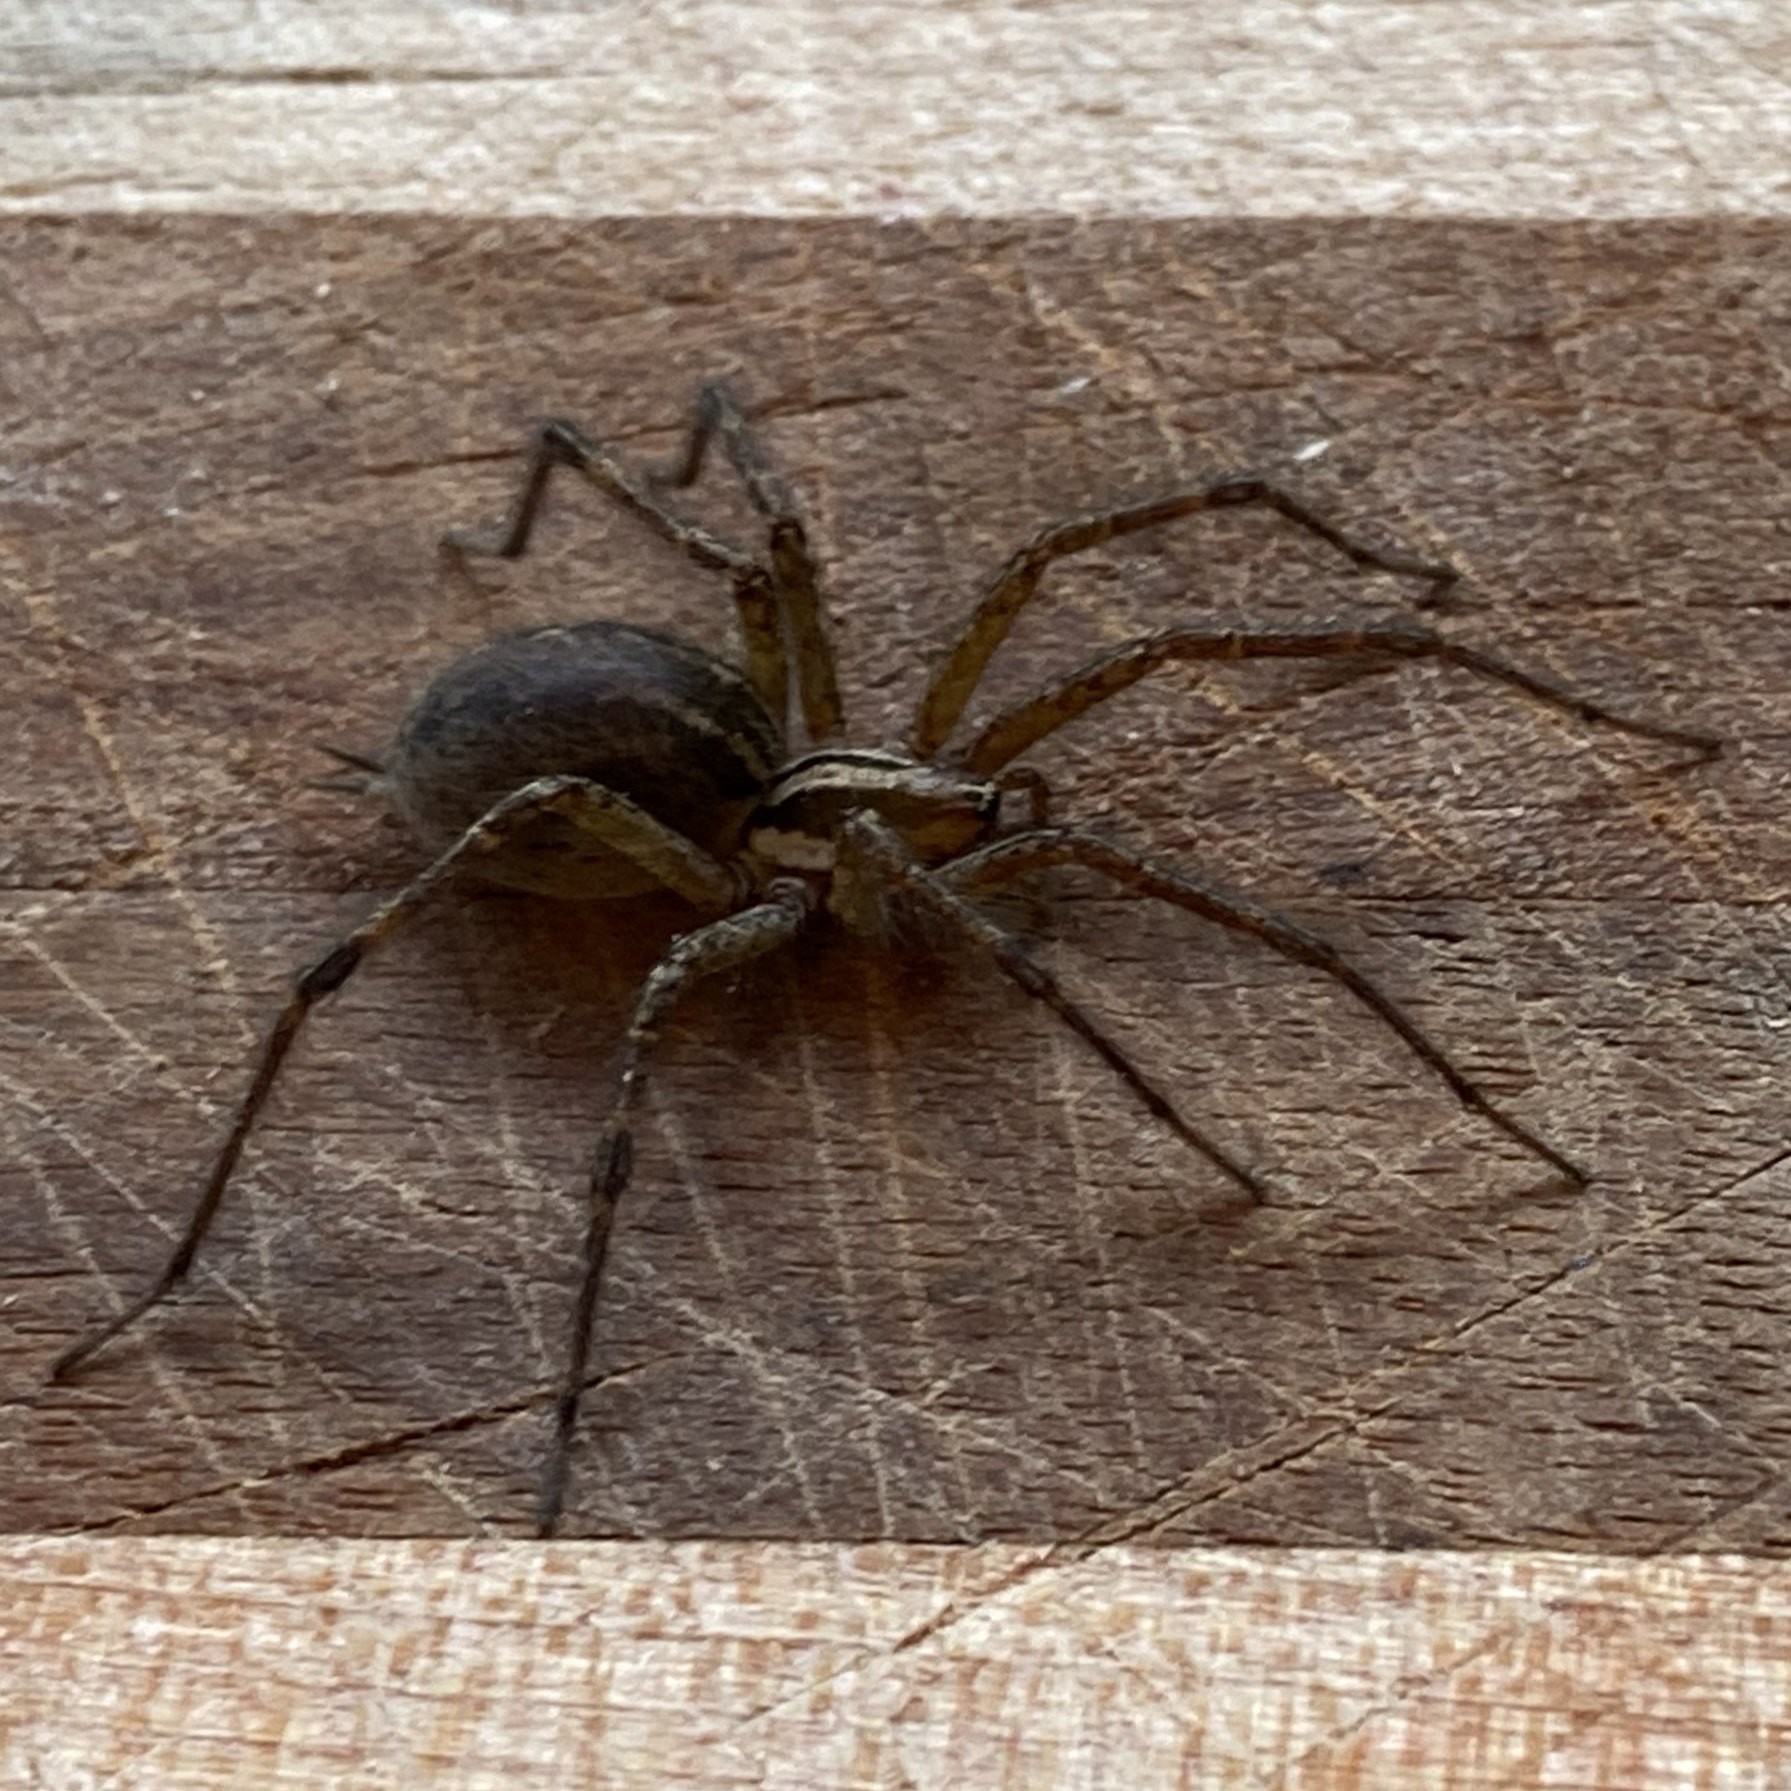 large brown spider on a cutting board